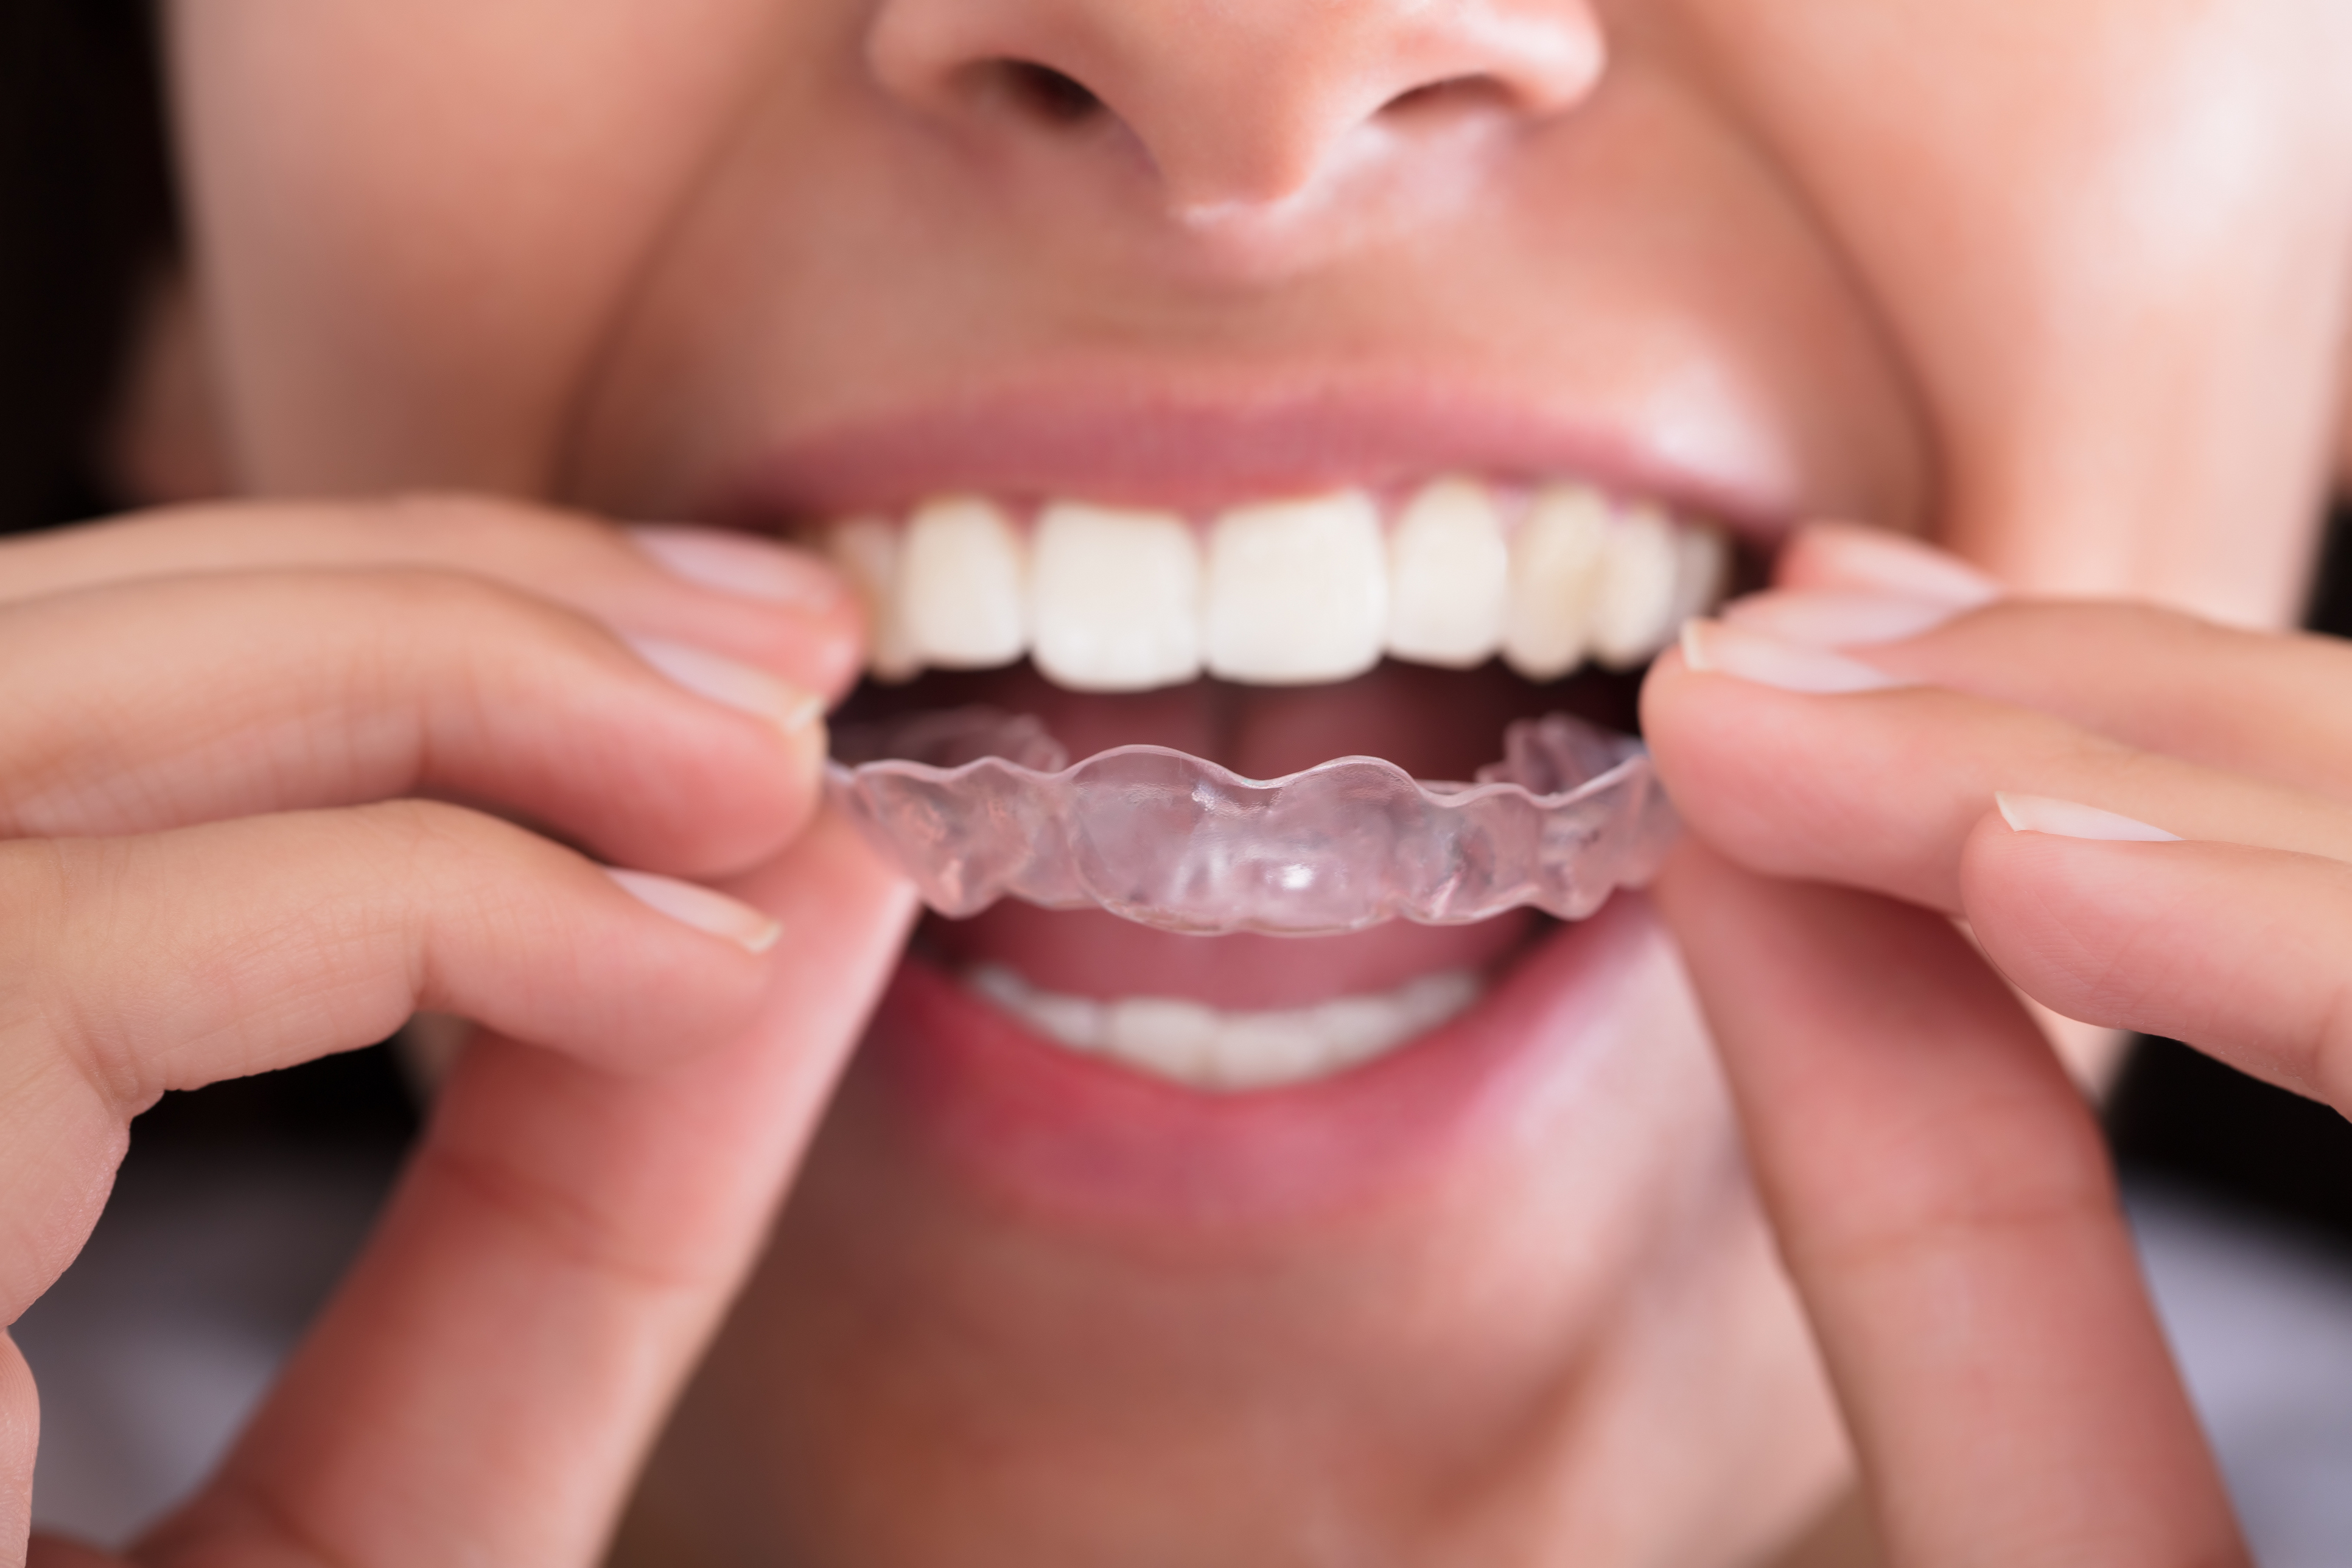 Schedule an appointment with our dentist in Grosse Pointe to learn more about how Invisalign works.